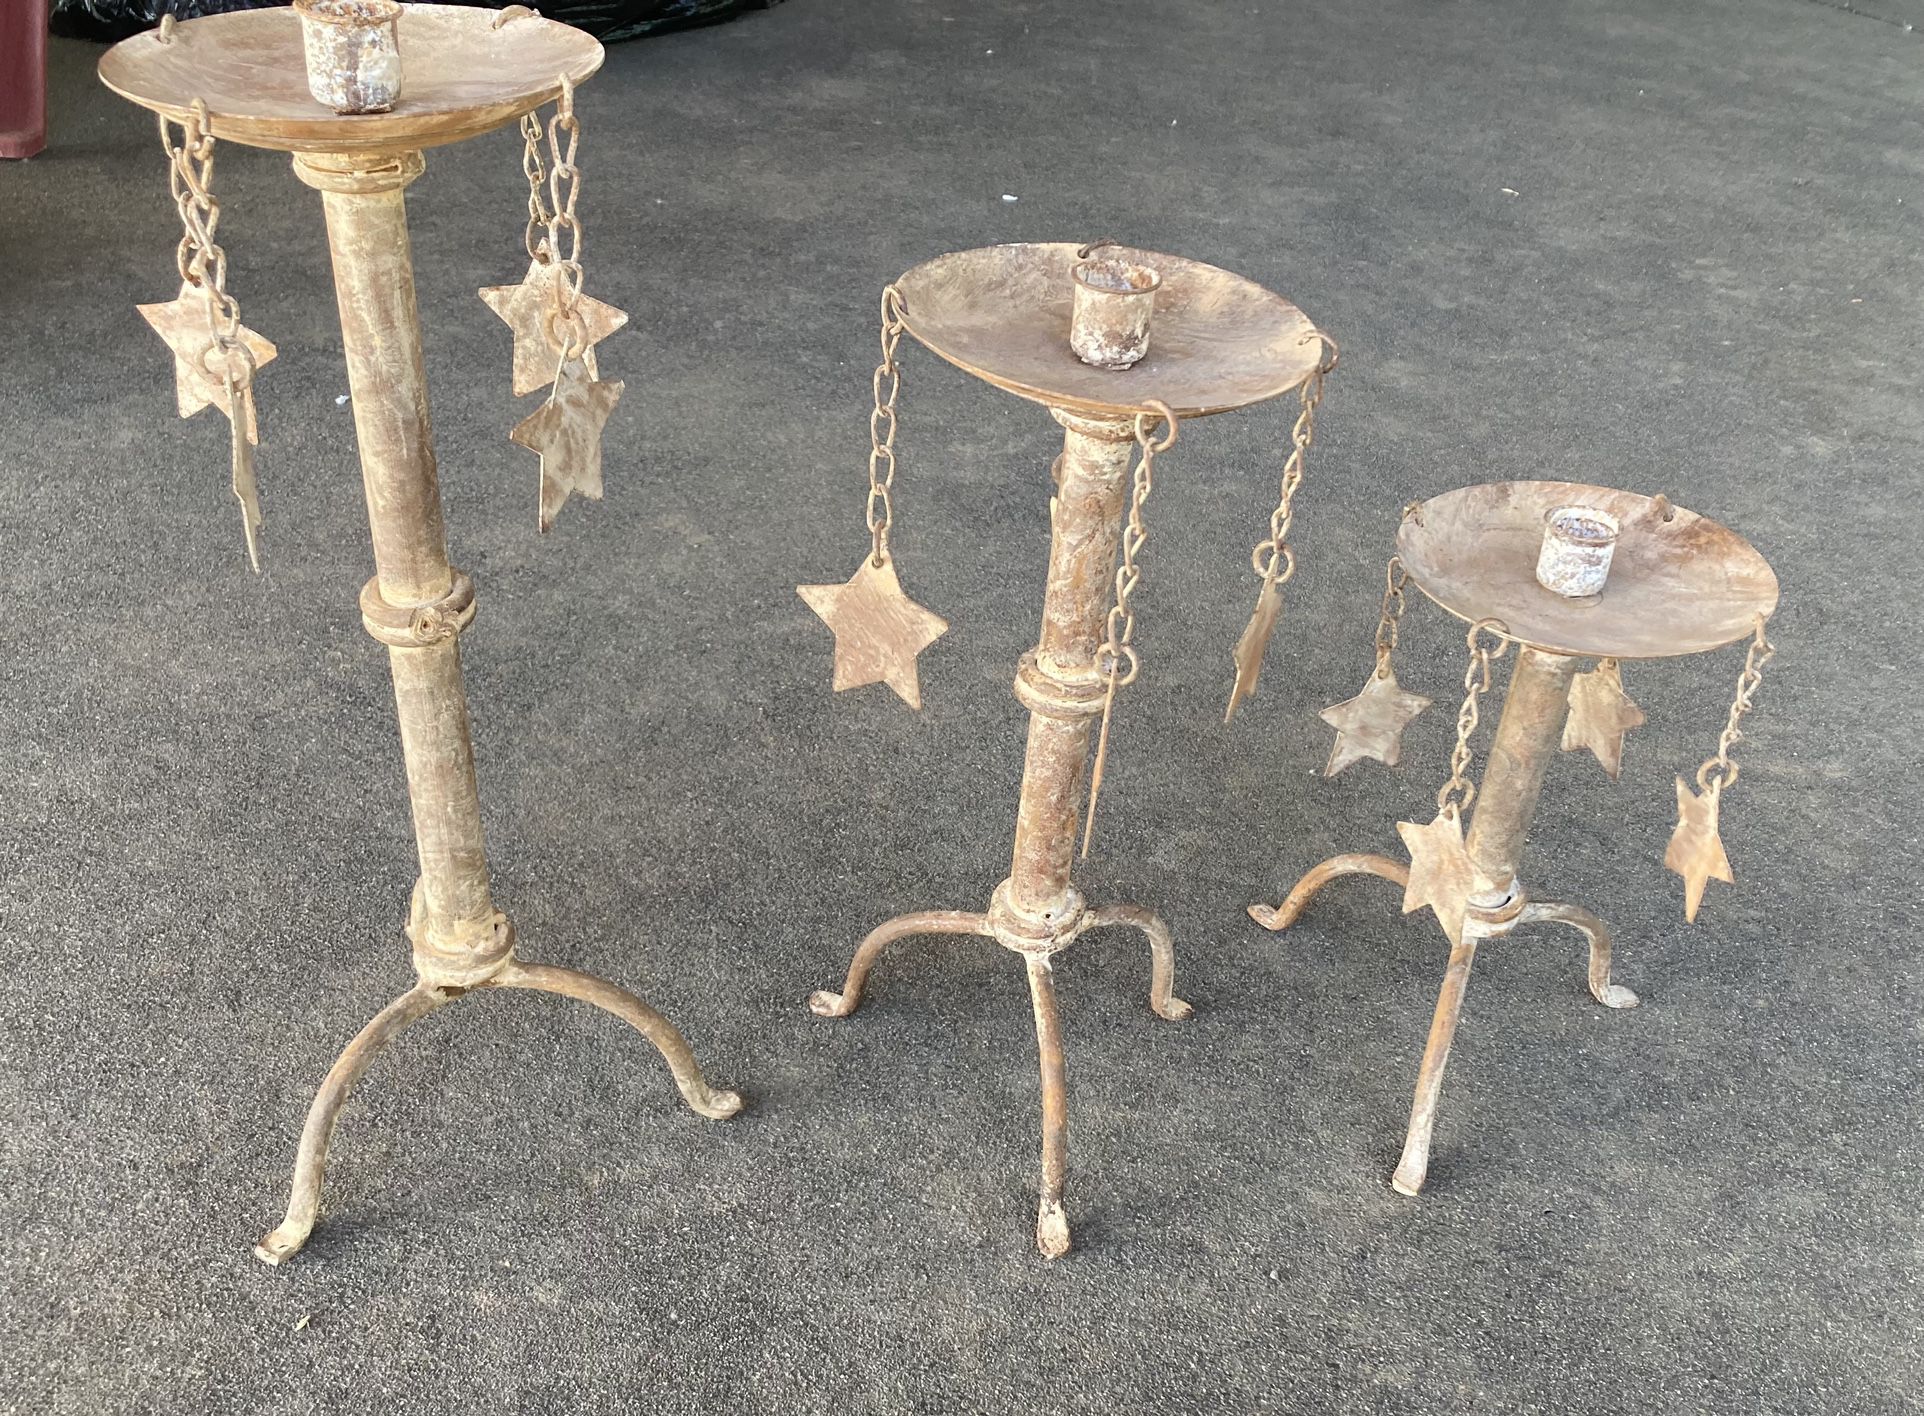 Star candle Holders